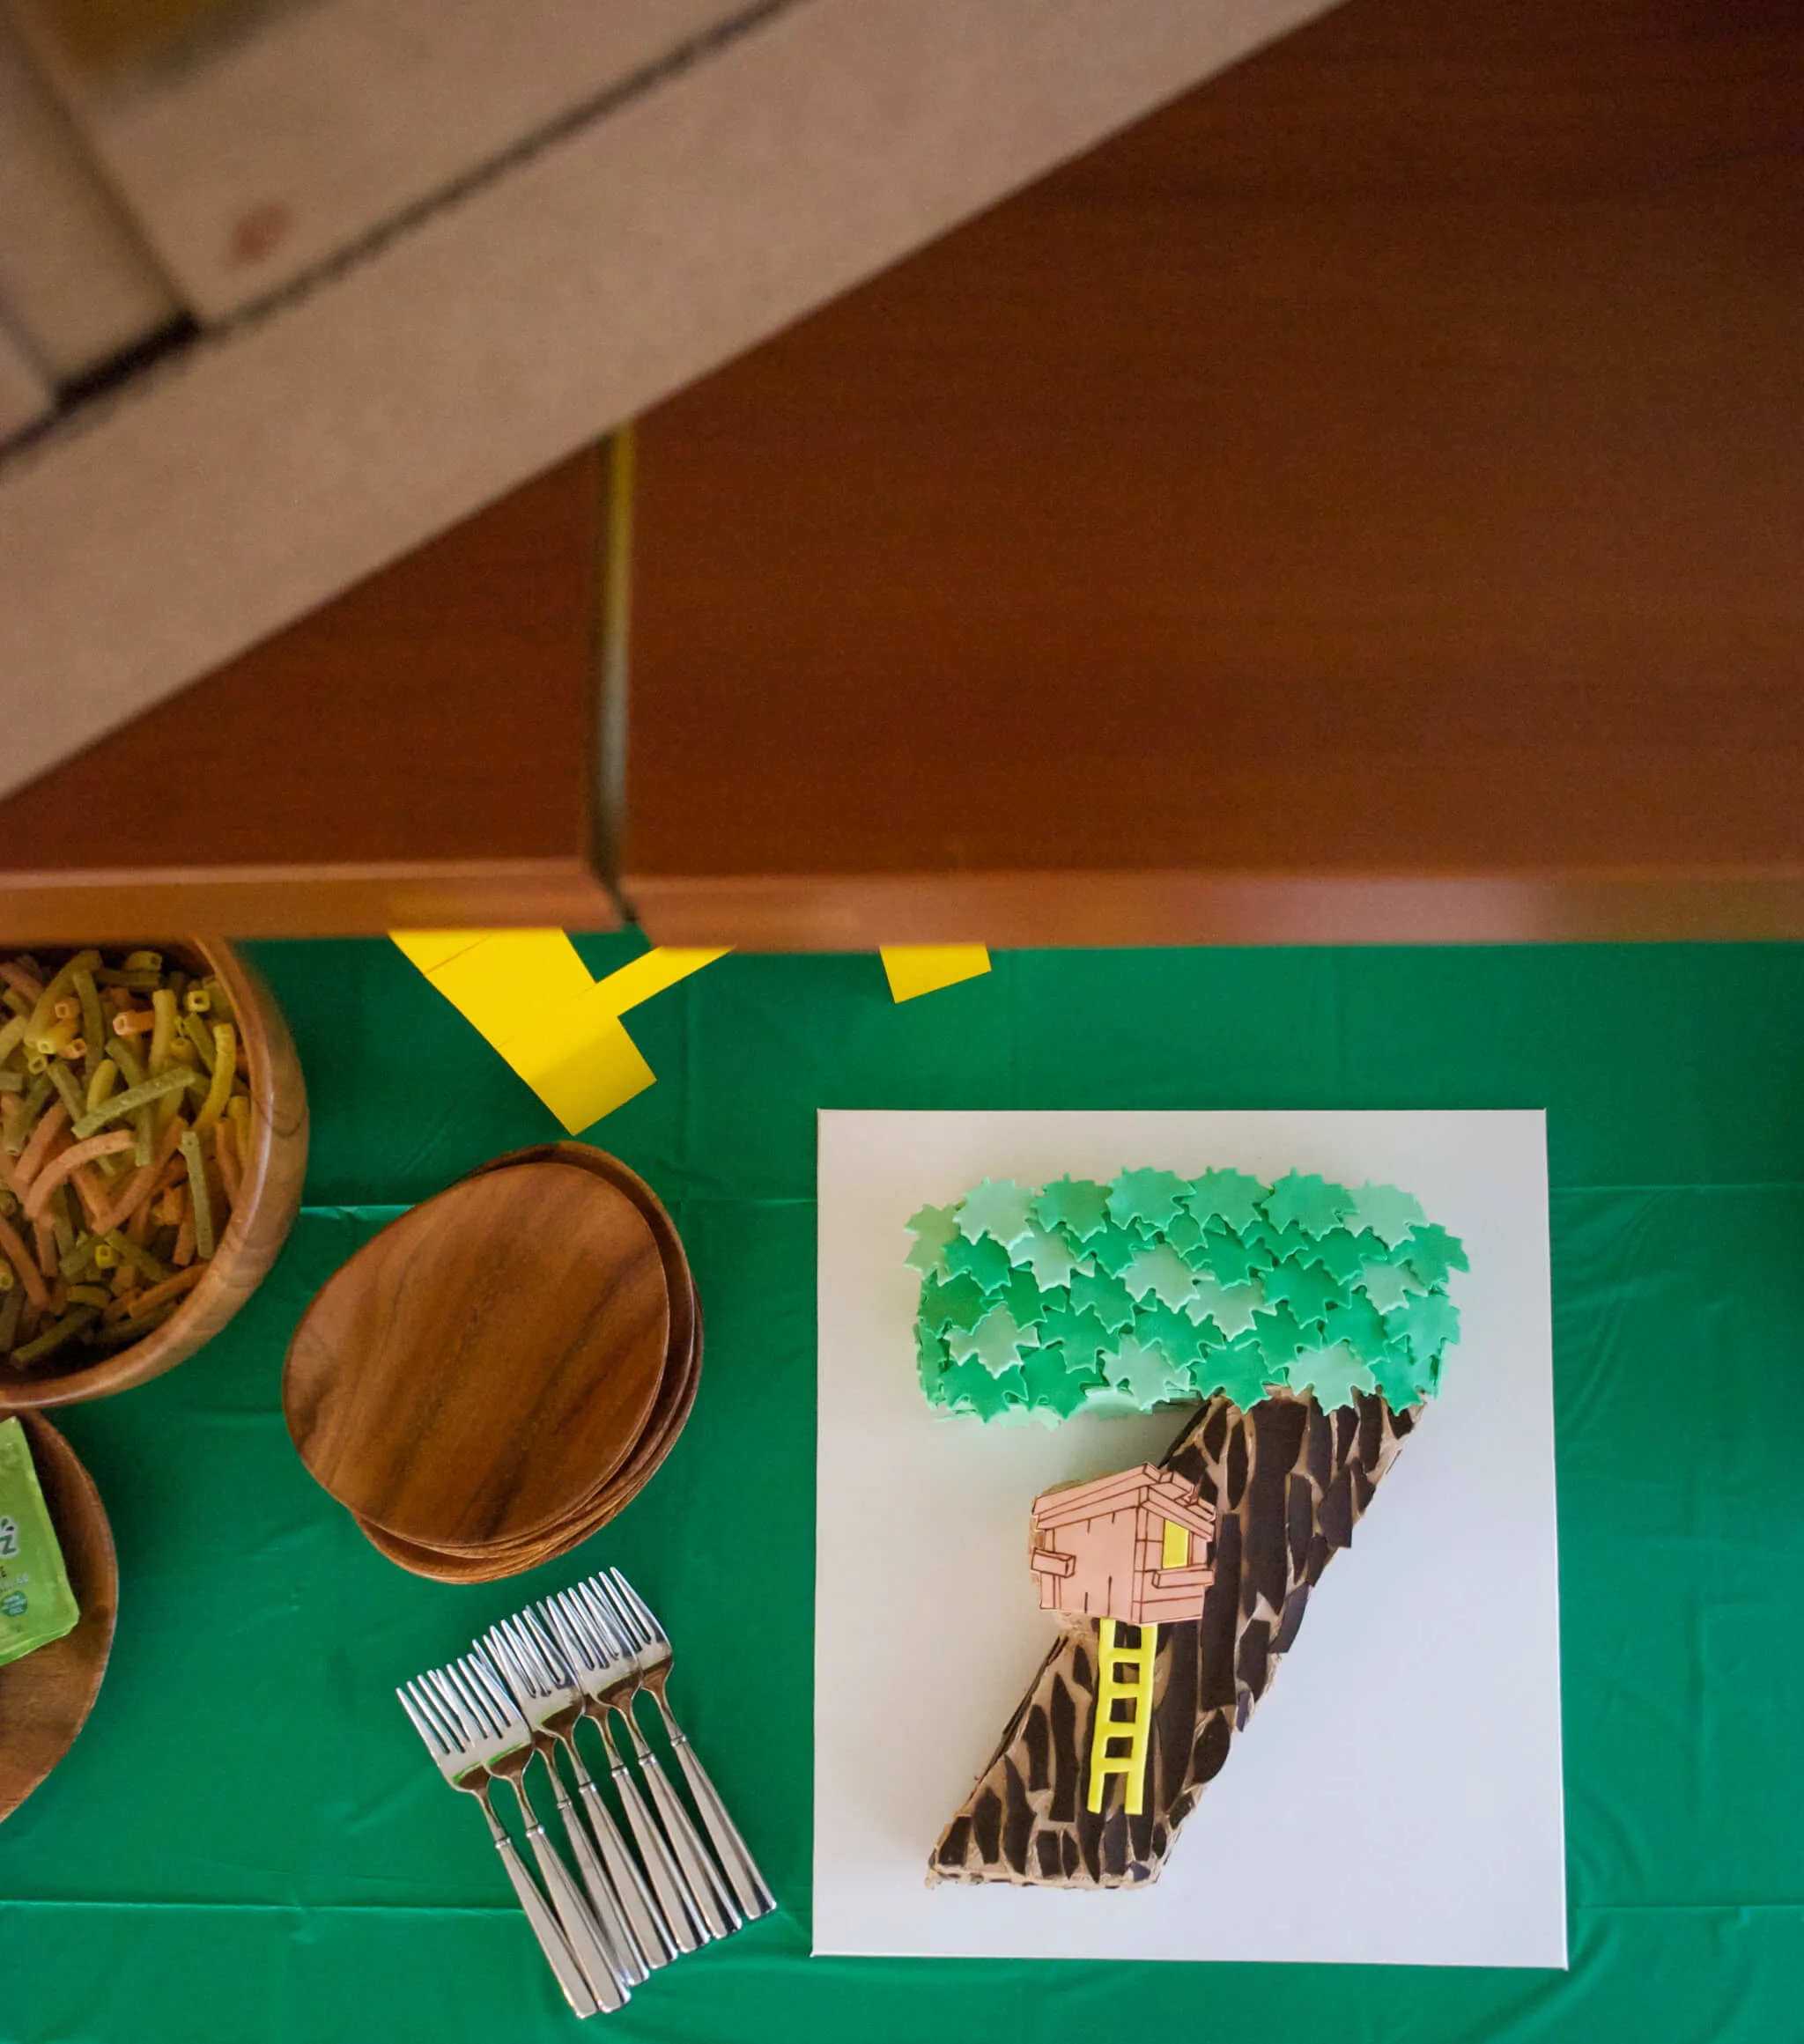 Easy DIY Magic Tree House birthday cake for a Magic Tree House 7th birthday party. Edible tree house and leaves are fondant, bark is chocolate. Get the free printable template to make the tree house and number 7 shaped cake - no special cake pan needed!